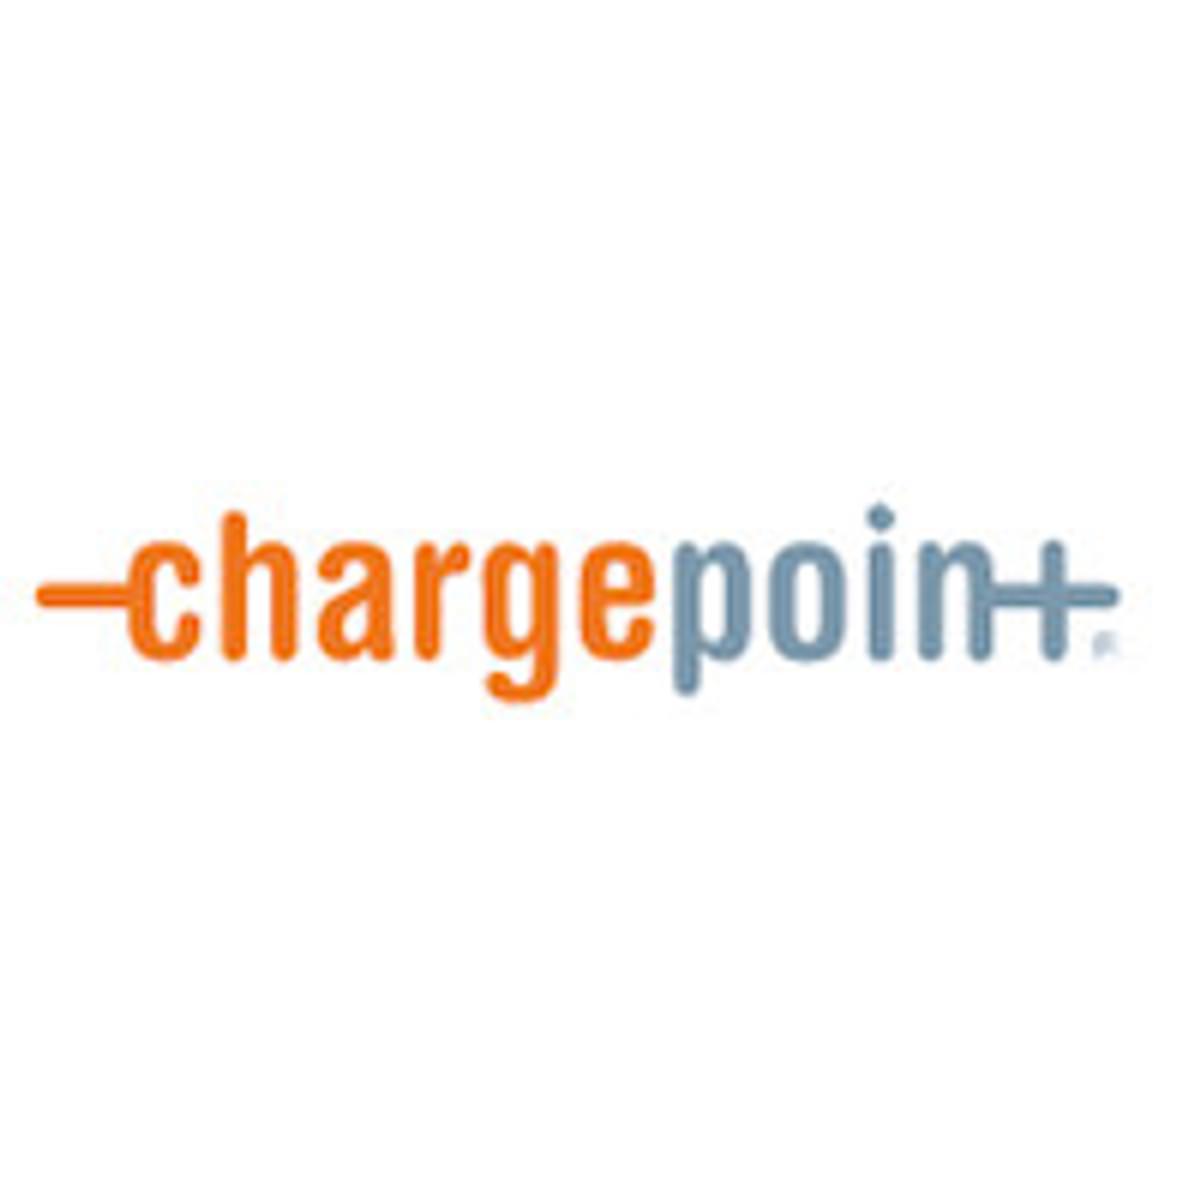 ChargePoint neemt ViriCiti over image